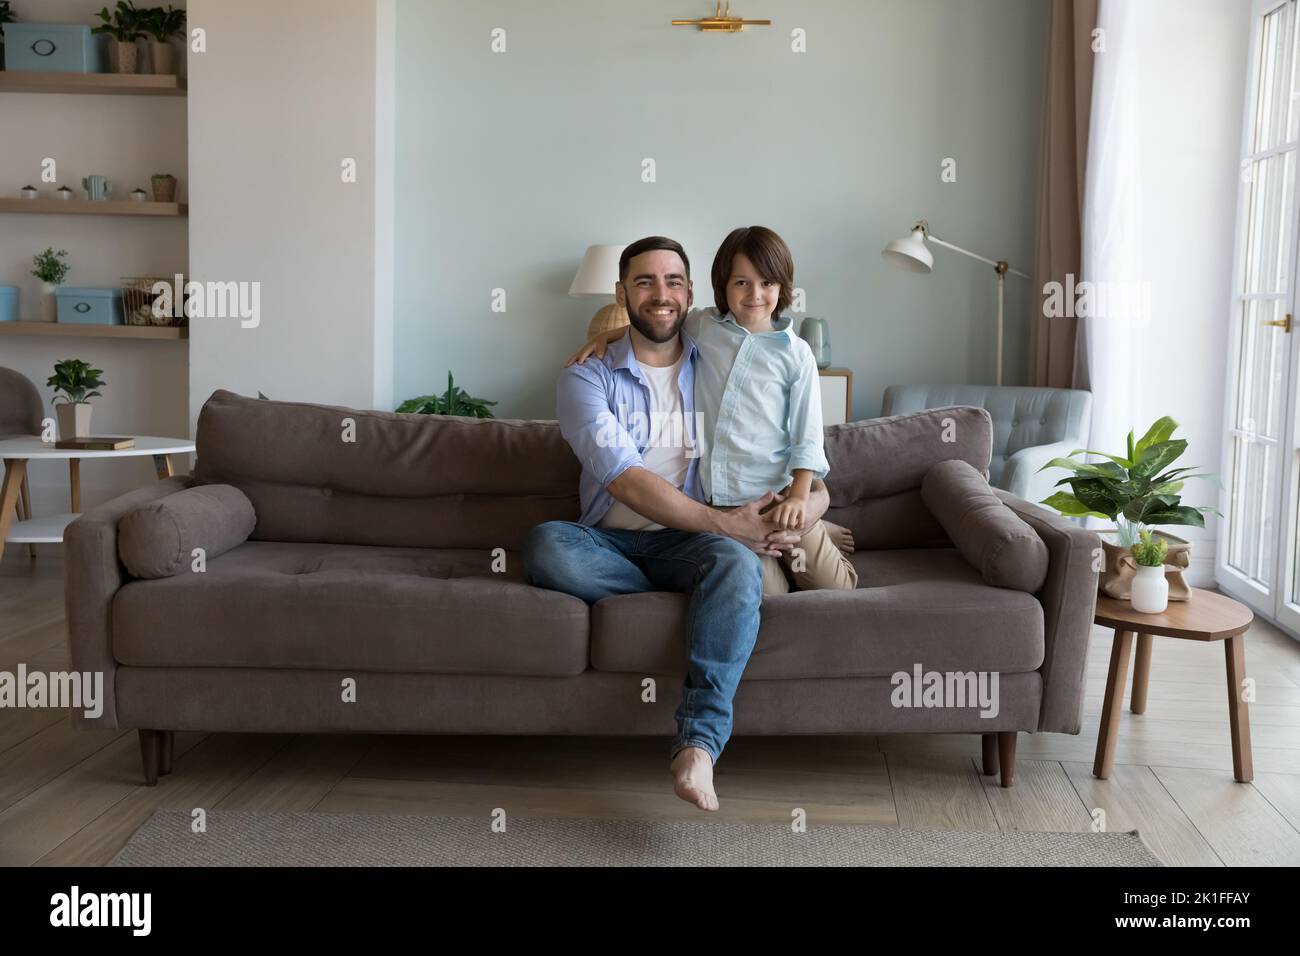 Happy handsome dad and little son kid sitting on sofa Stock Photo